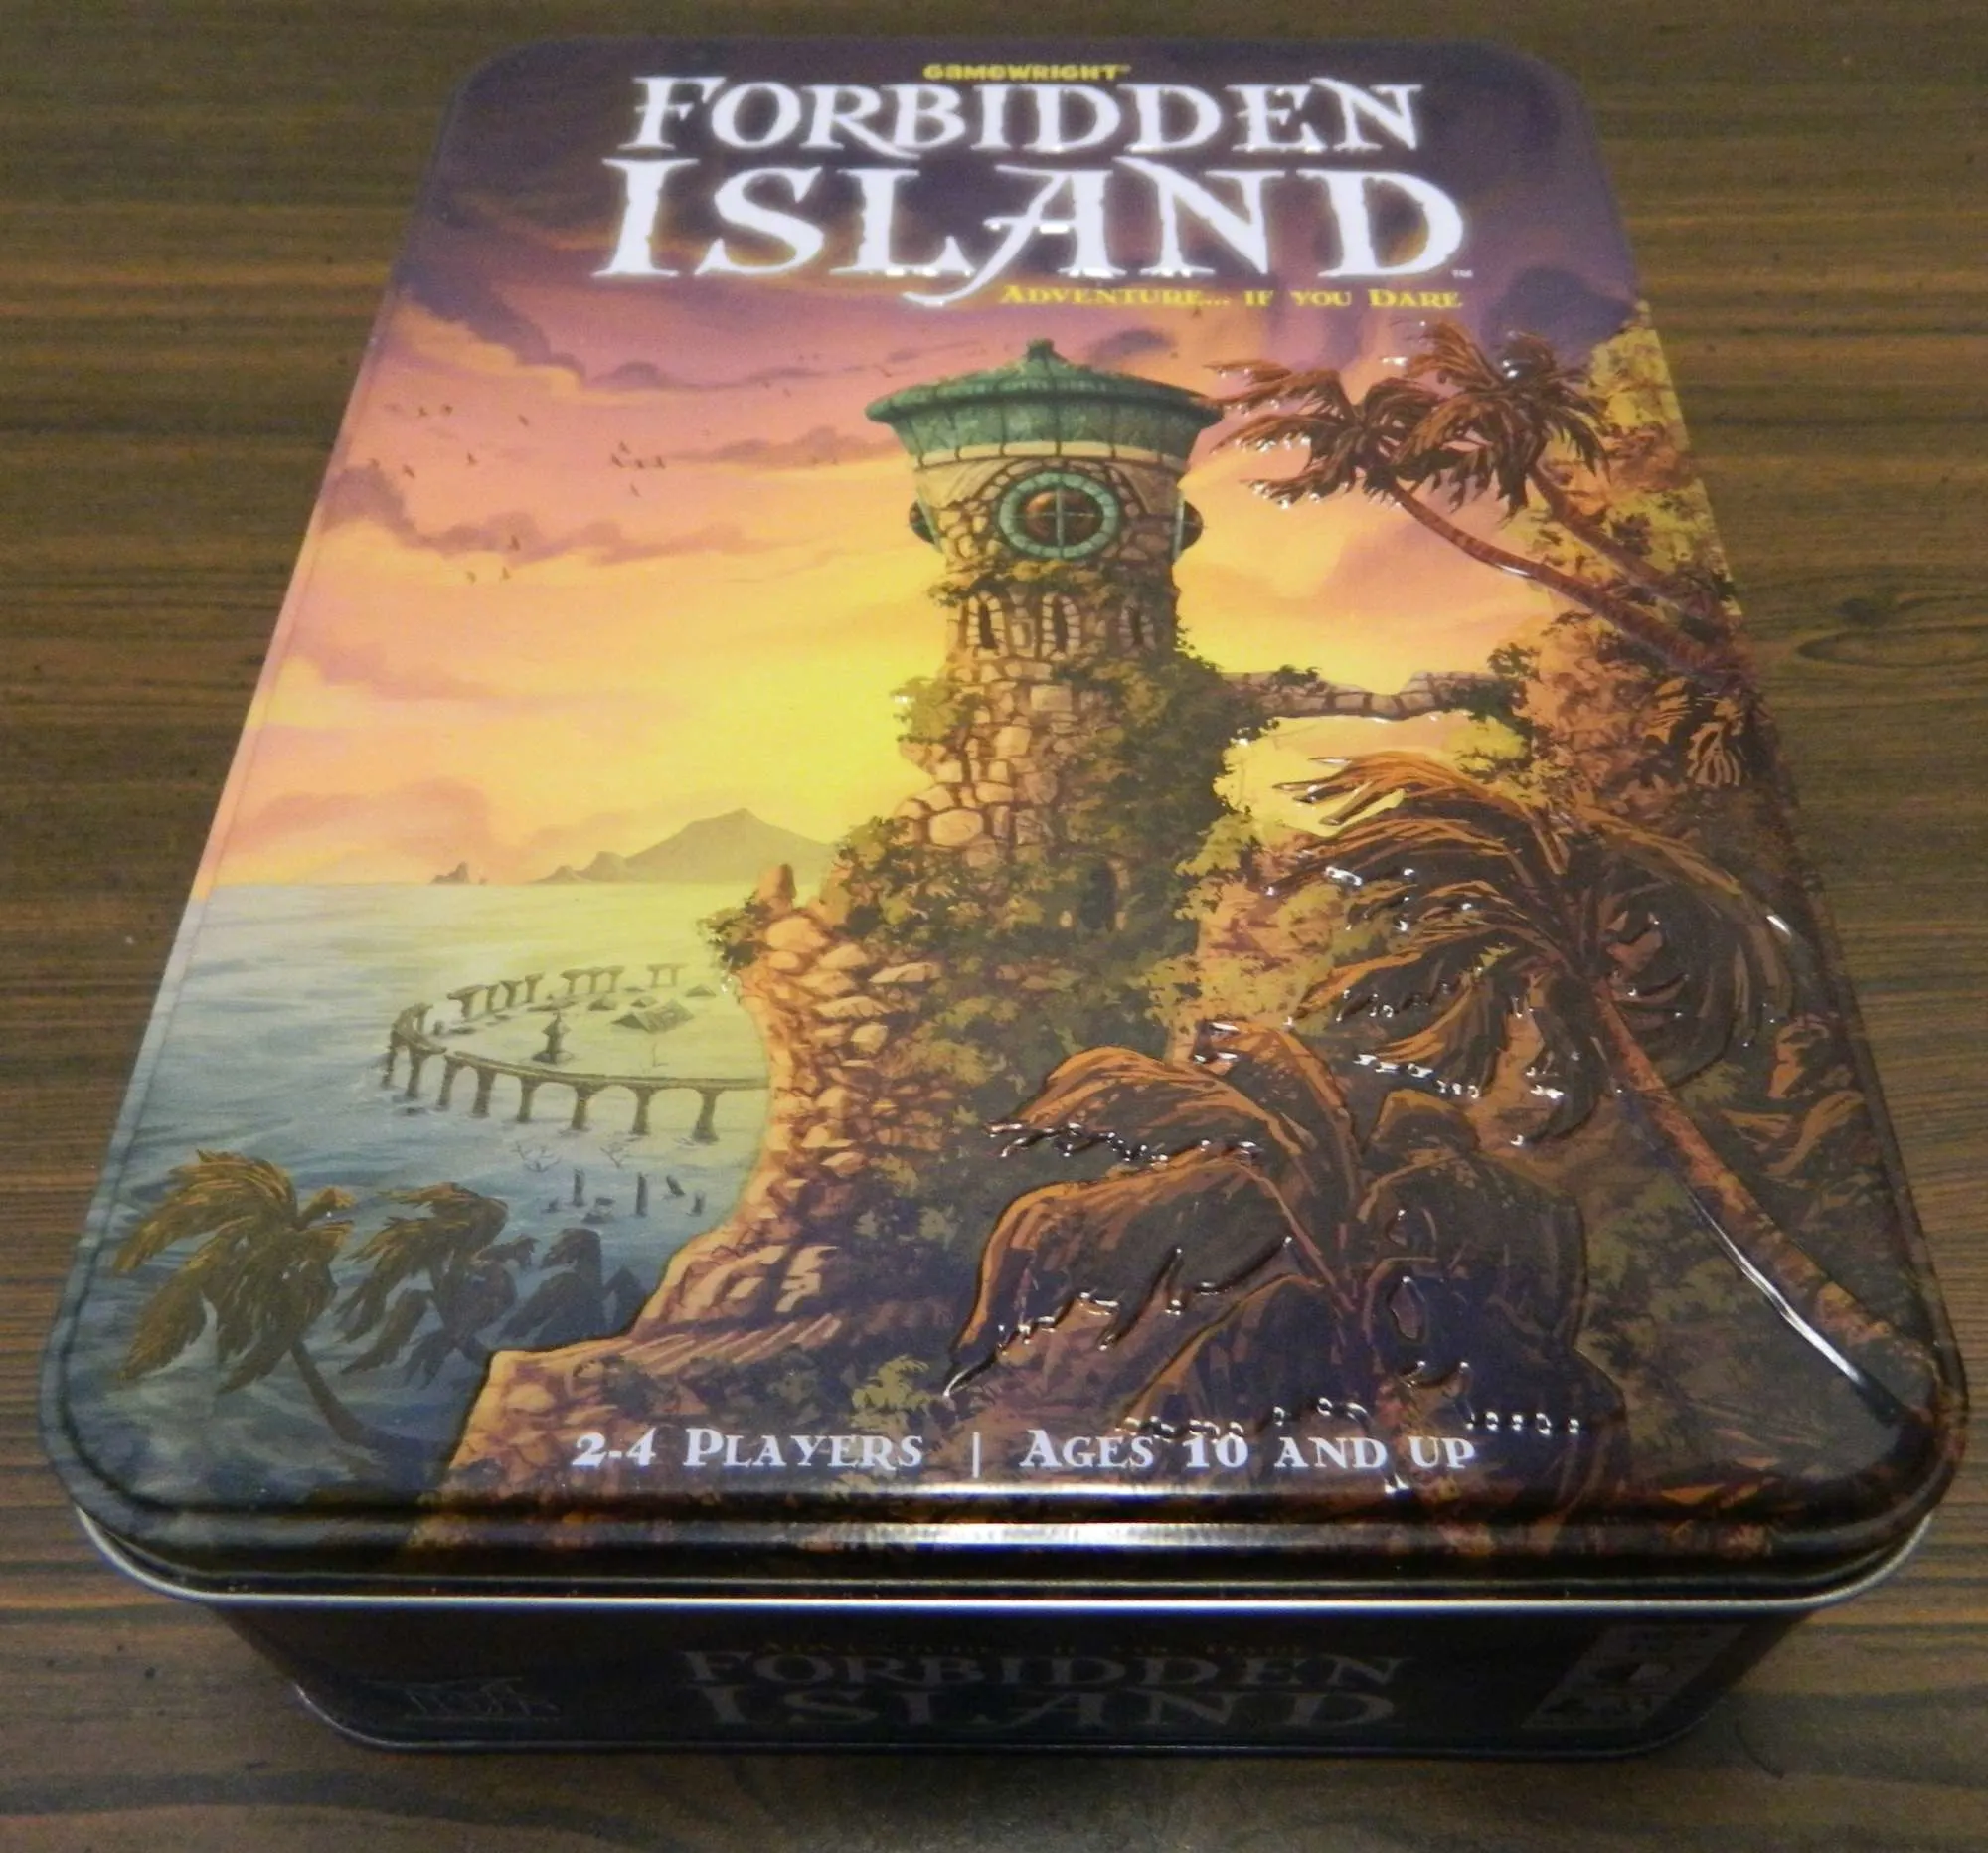 Game of the Month: Forbidden Island